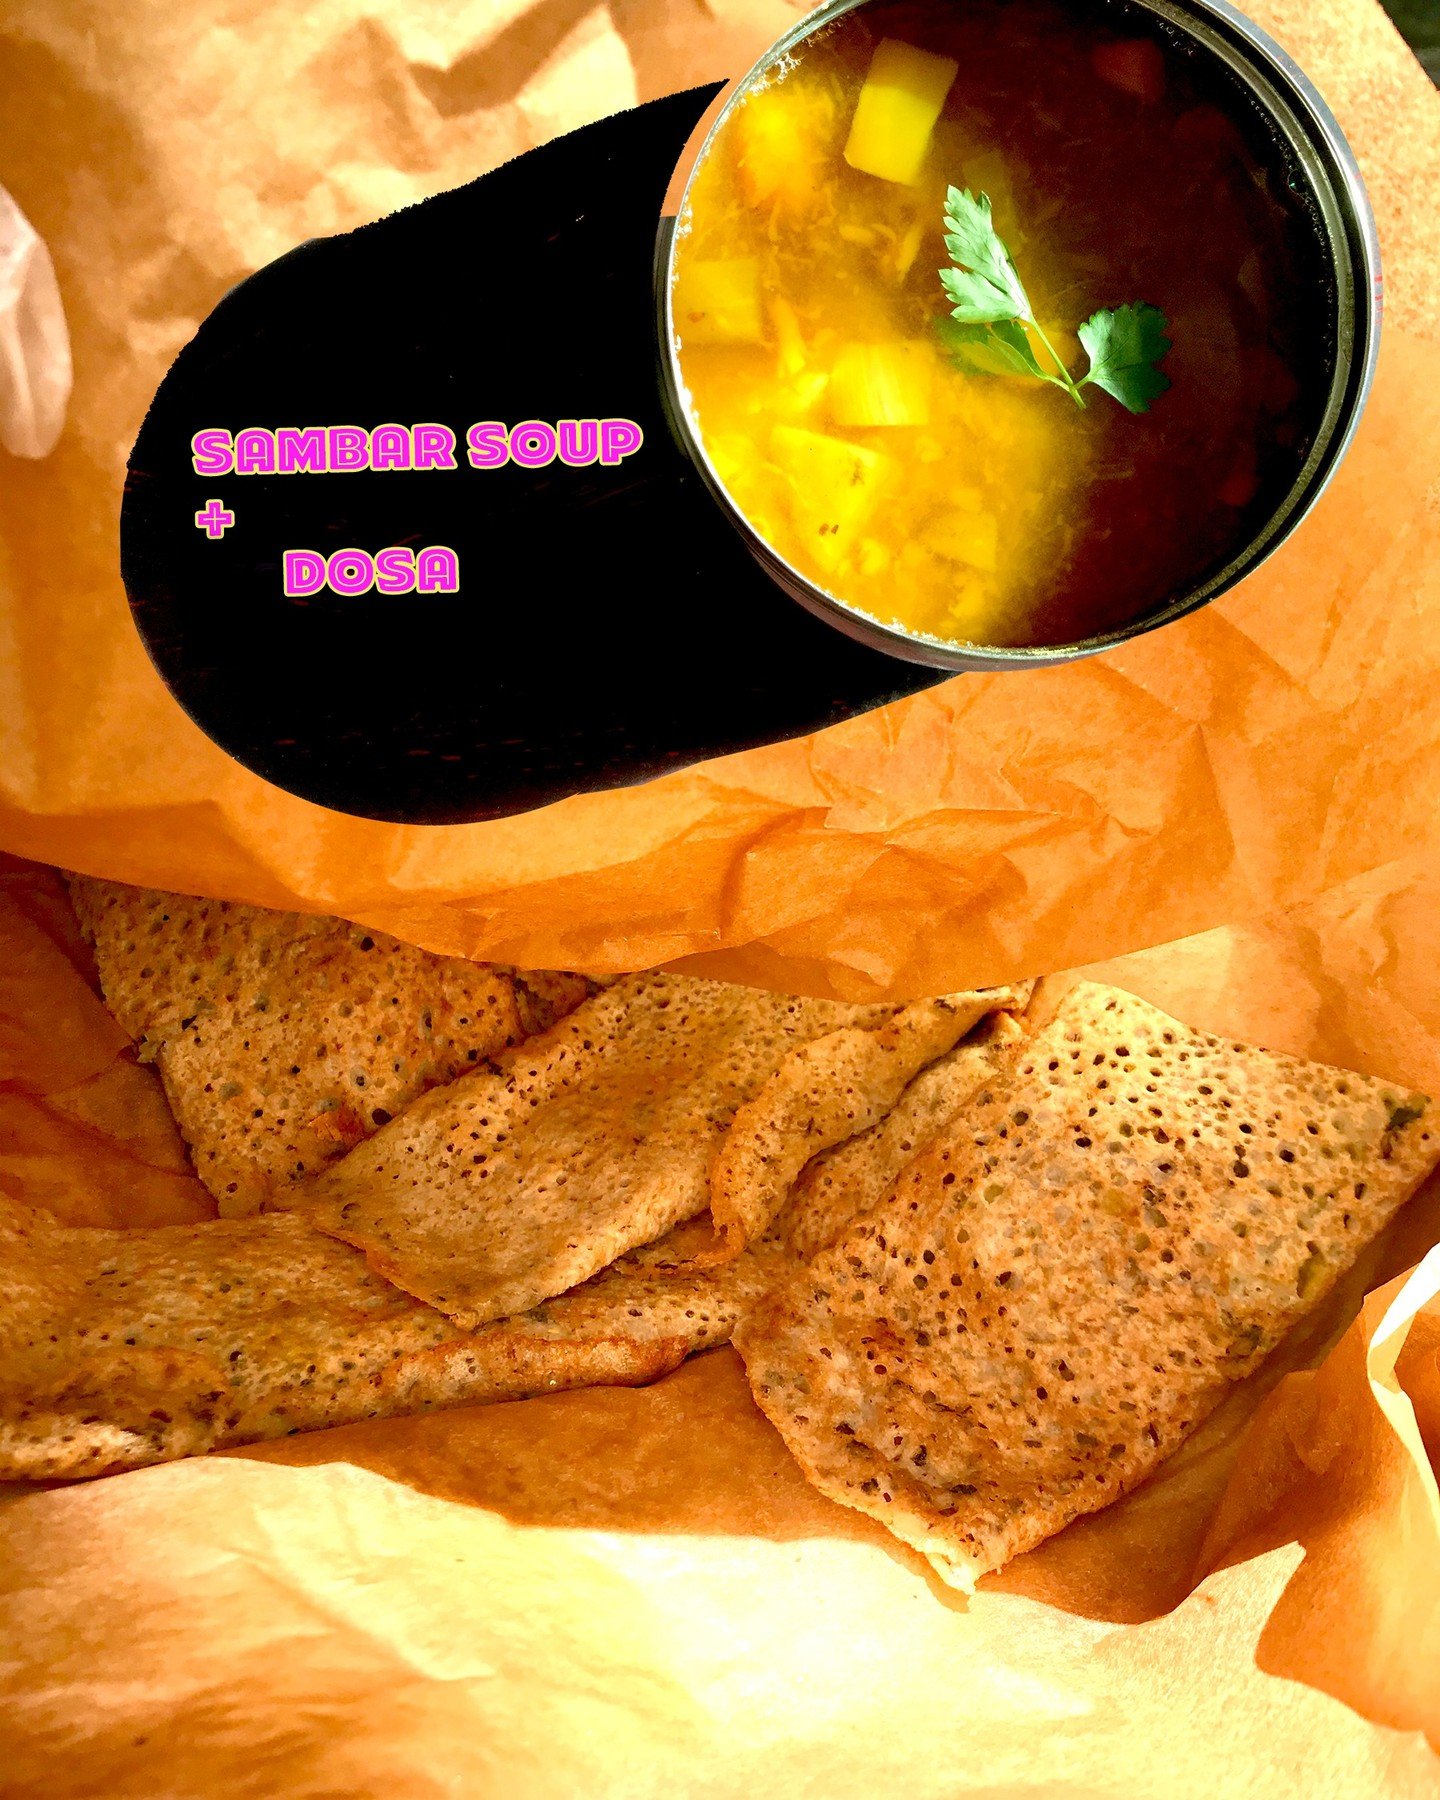 Hey Local Peeps, THIS friday, we will have infamous South Indian (all vegan) Specialties:
DOSA and SAMBAR Soup- to pick up, at our Home Store, 10 am to 1 pm. 

For $7, you will get:
- 2 small dosas (Crepe like/ pancake like, made from black beans and